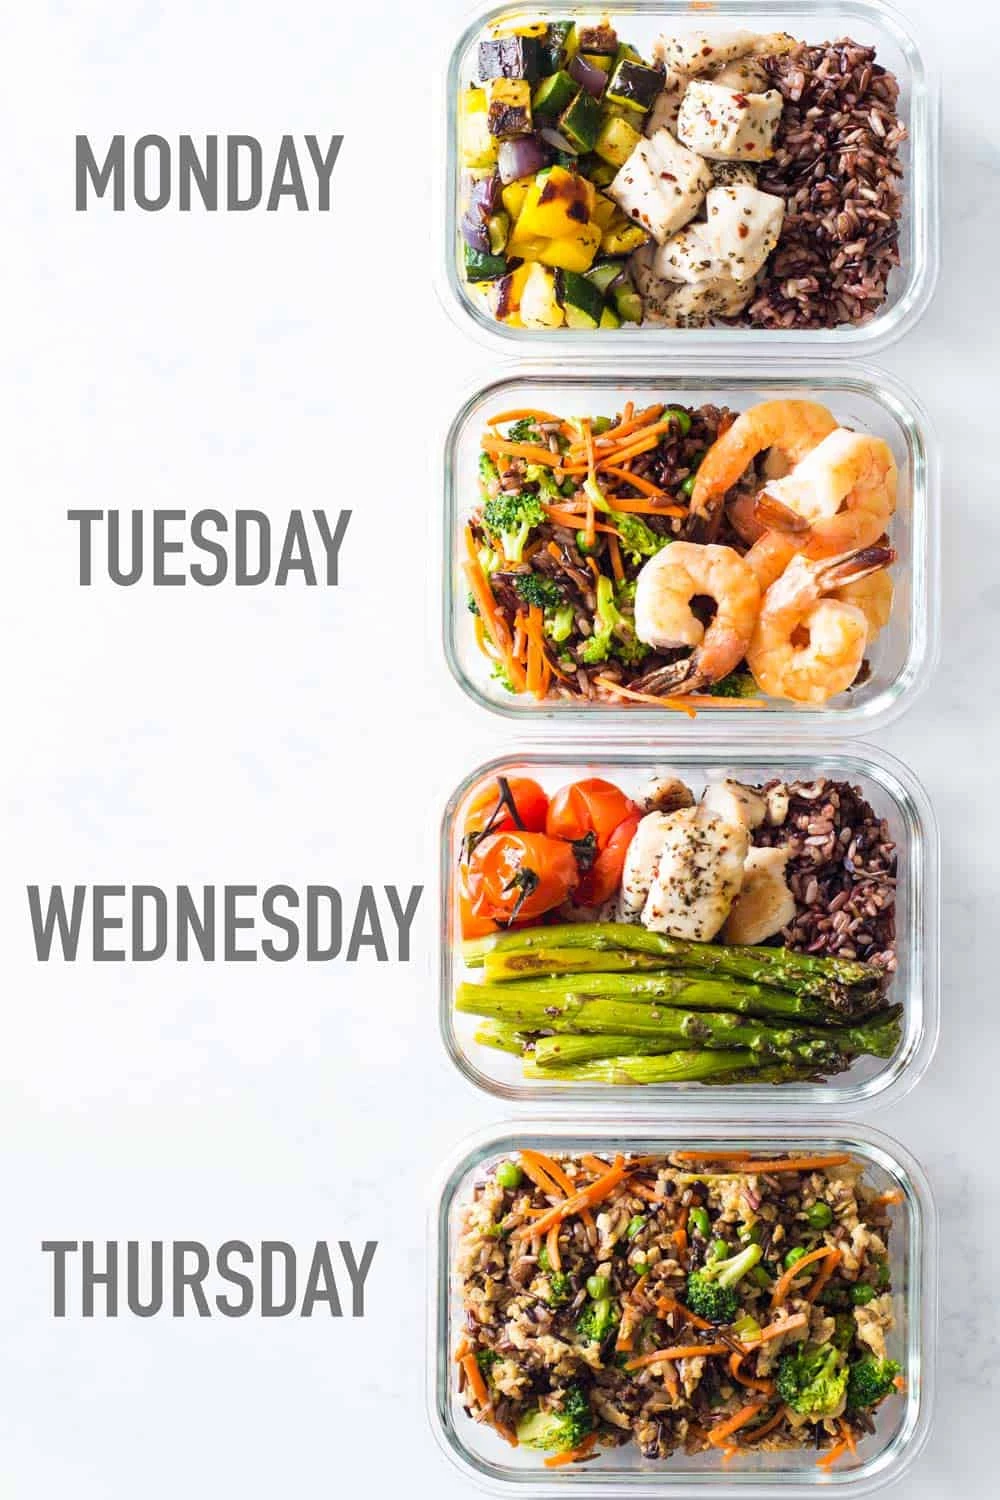 Meal Prep Recipes on a Budget | Healthy and Delicious Meal Prep Cookbook for Beginners (with Pictures!)